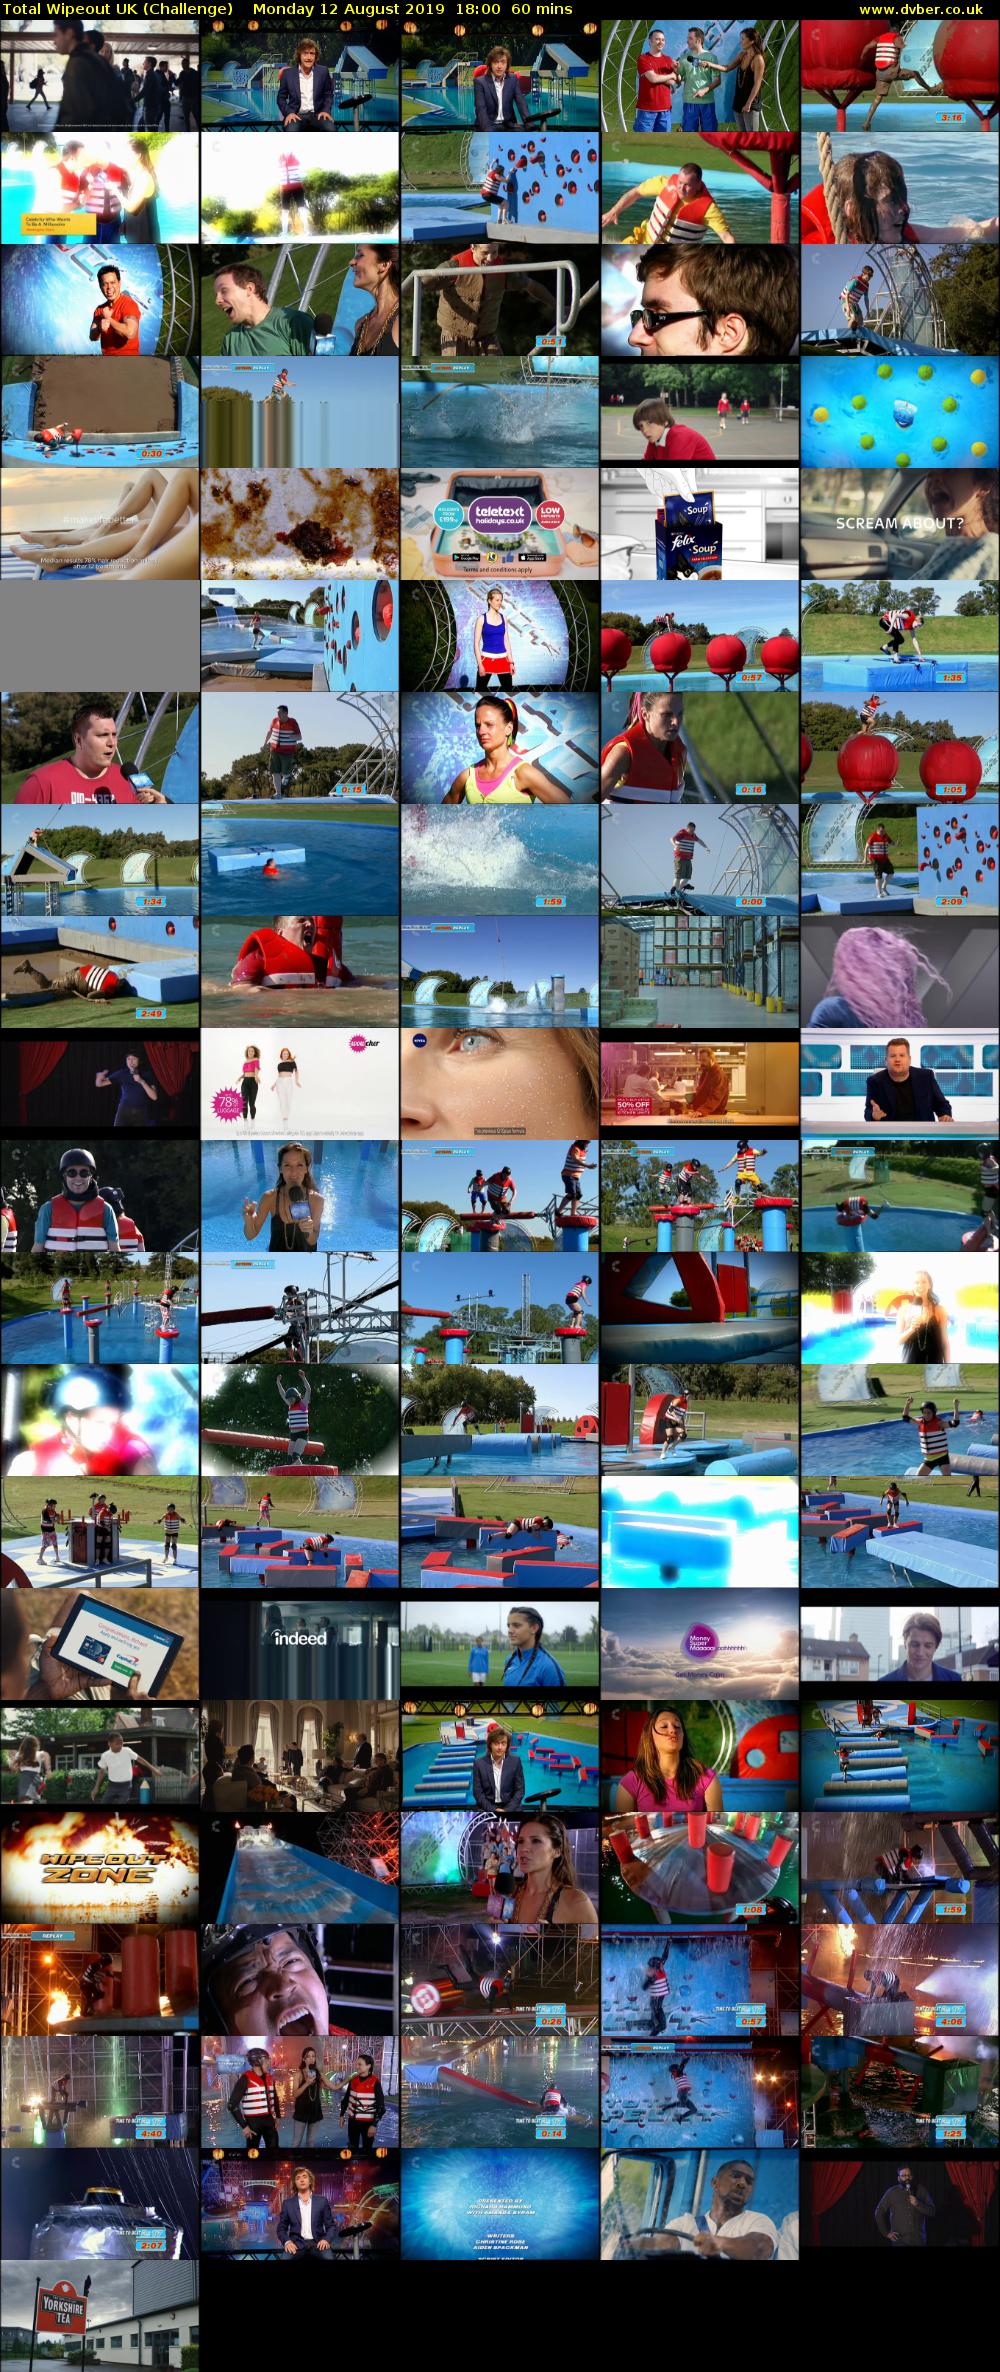 Total Wipeout UK (Challenge) Monday 12 August 2019 18:00 - 19:00